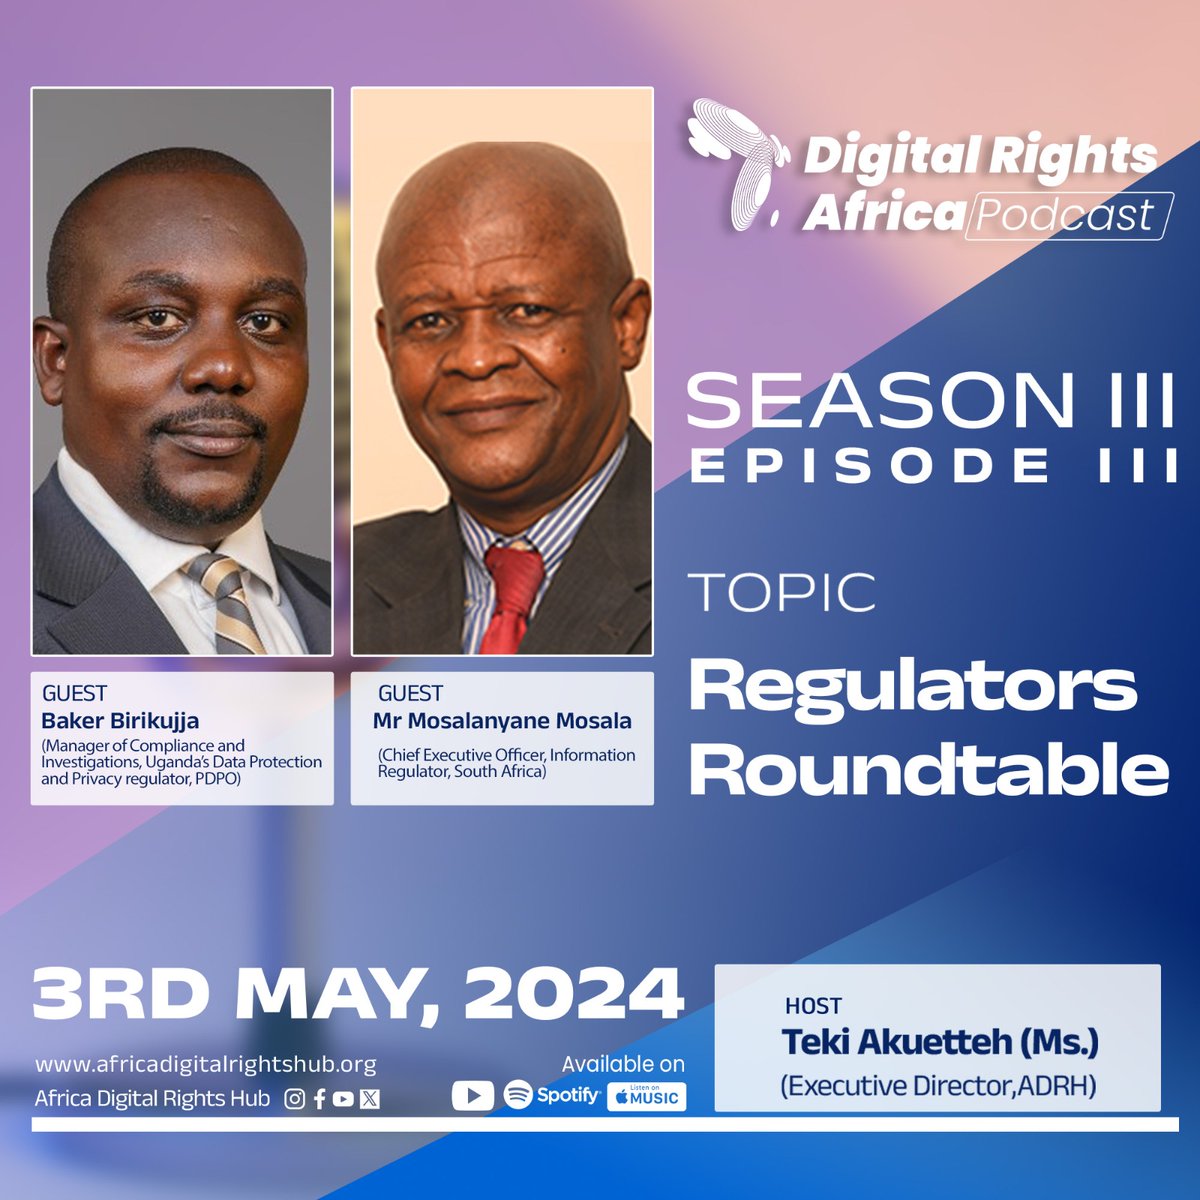 Coming soon🔜 @Birikujja will be representing @pdpoUG on the Regulators Roundtable, Episode 3, Season 3 of the Digital Rights Africa Podcast this Friday 3rd May 2024. He will be sharing about the progress made by the Office. Catch up this episode on YouTube and Spotify.…